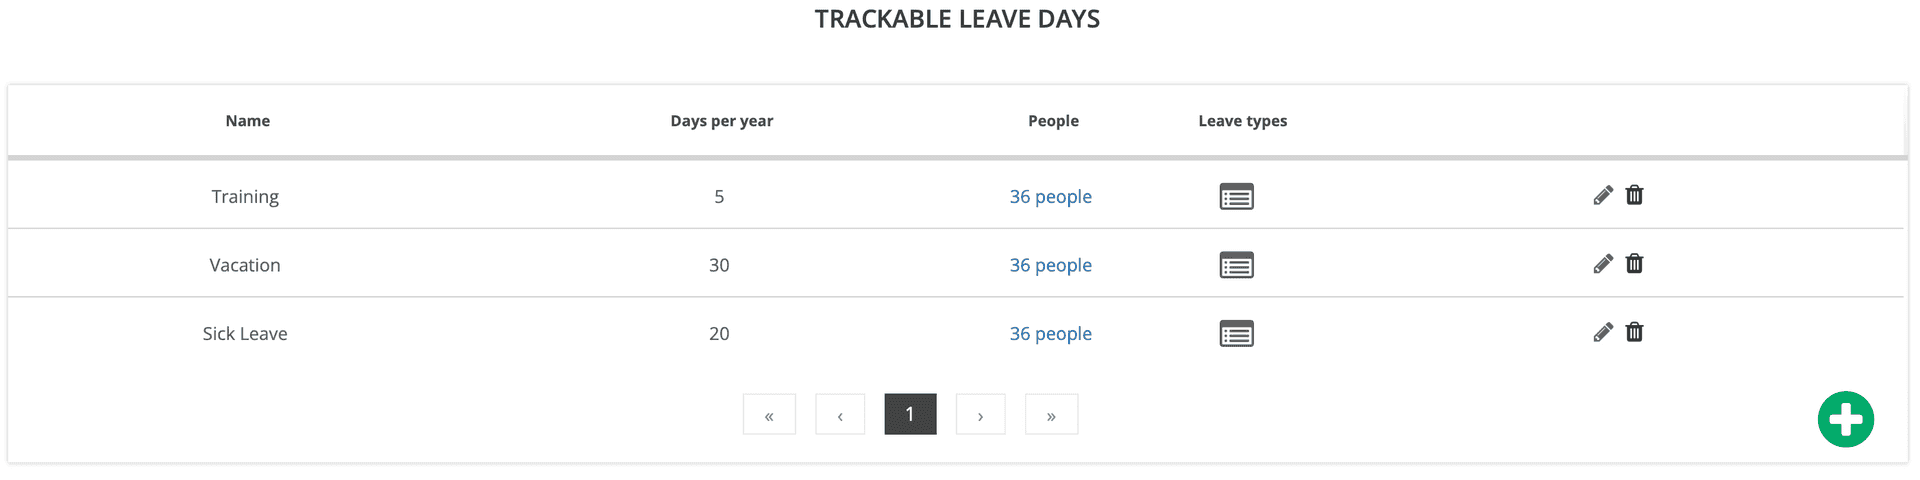 Trackable leave types overview